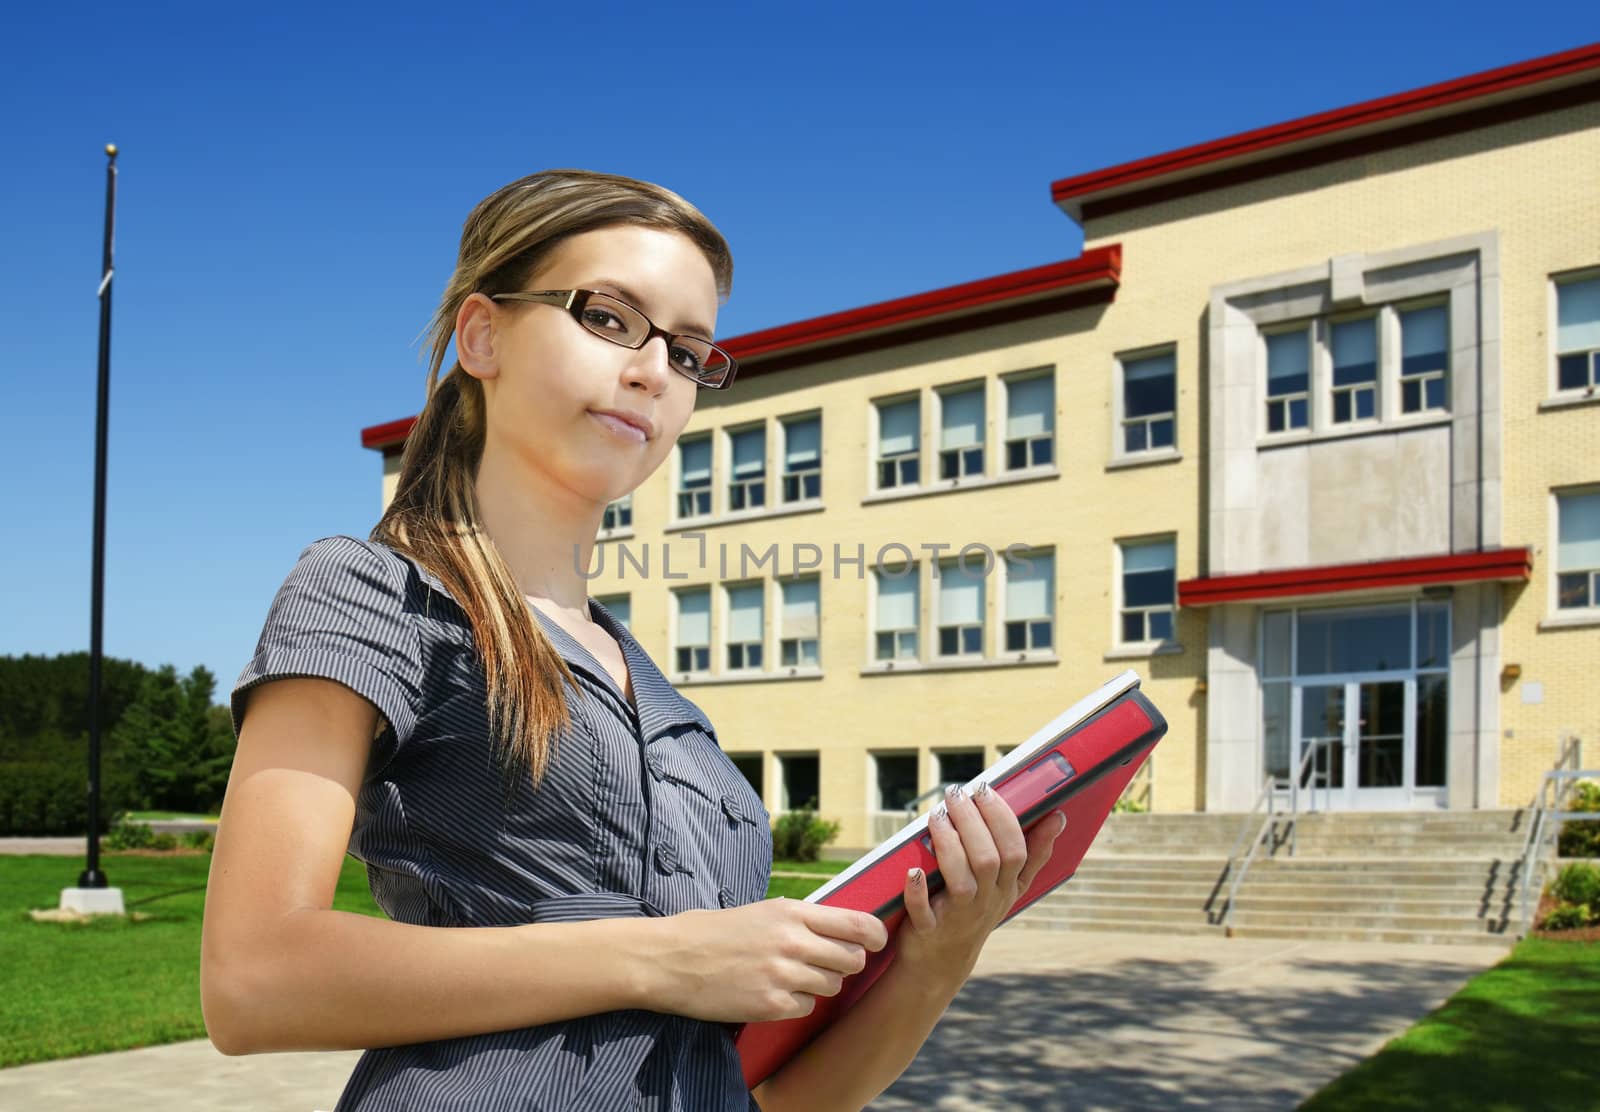 Back to school: confident young female student with books in front of school entrance. Could be college or small university campus.